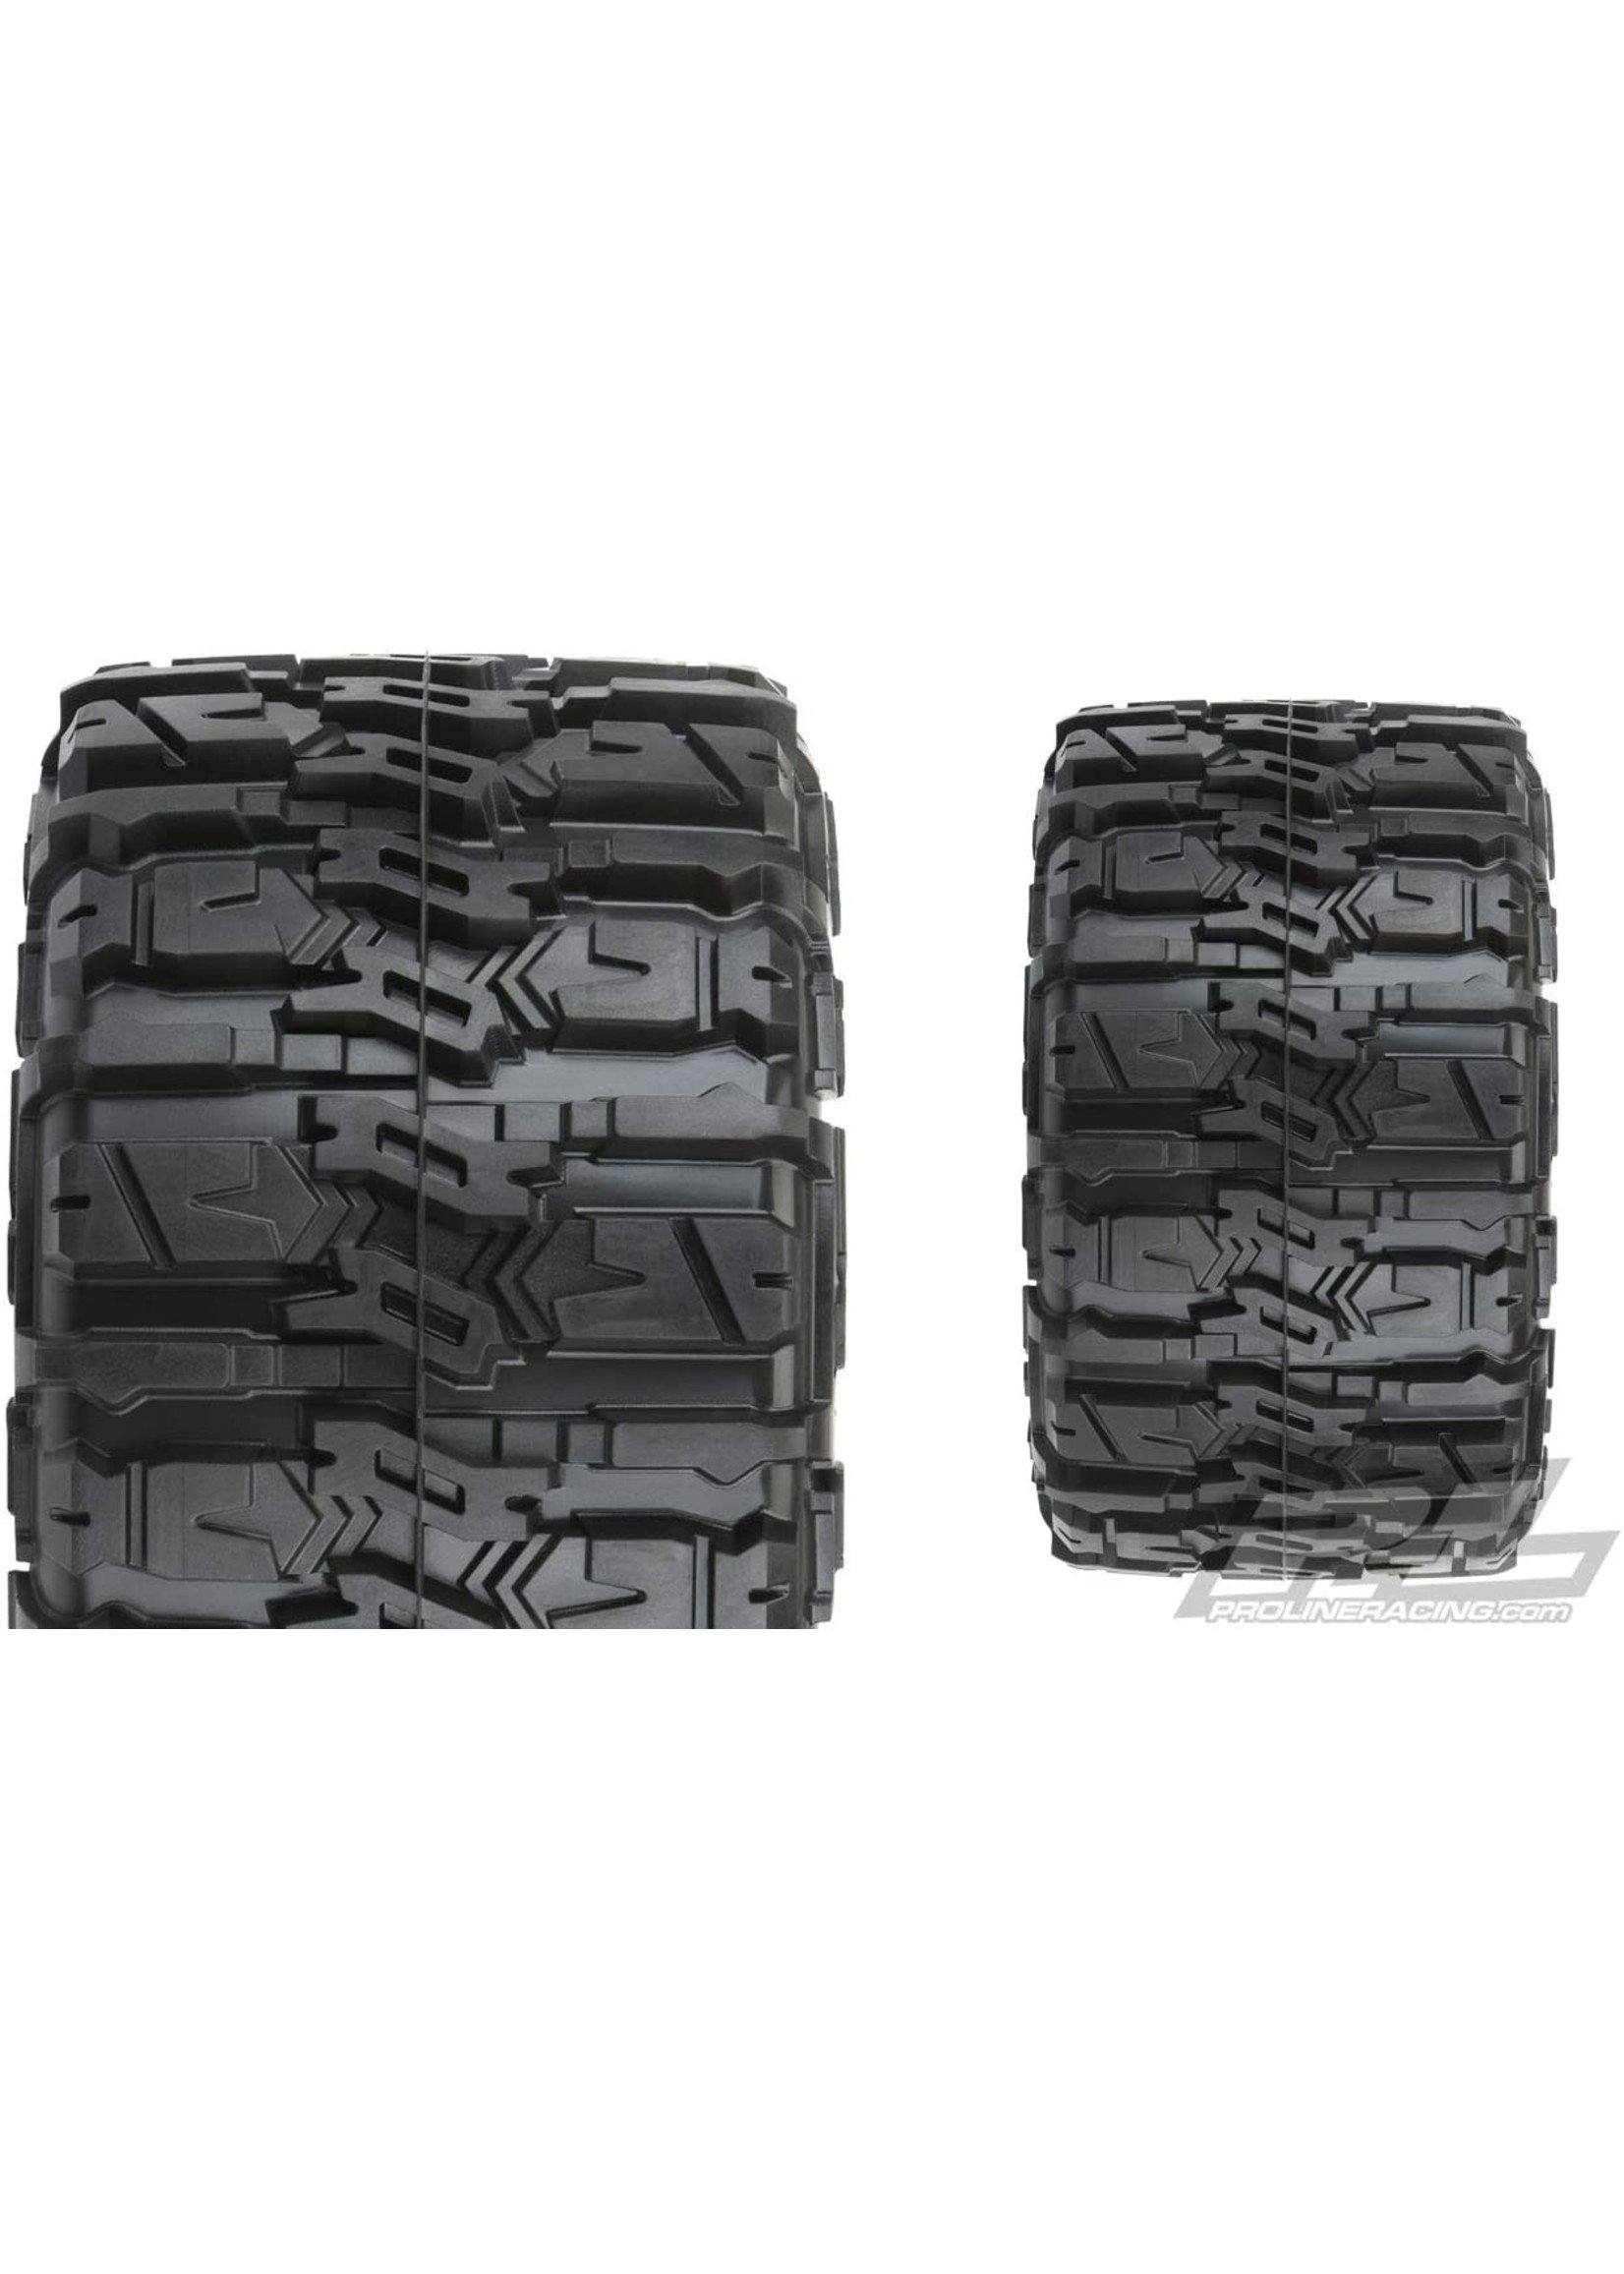 Pro-Line 10168-10 - Trencher HP 2.8 Belted Tires Mounted on Raid 6x30 Wheels - Black F/R